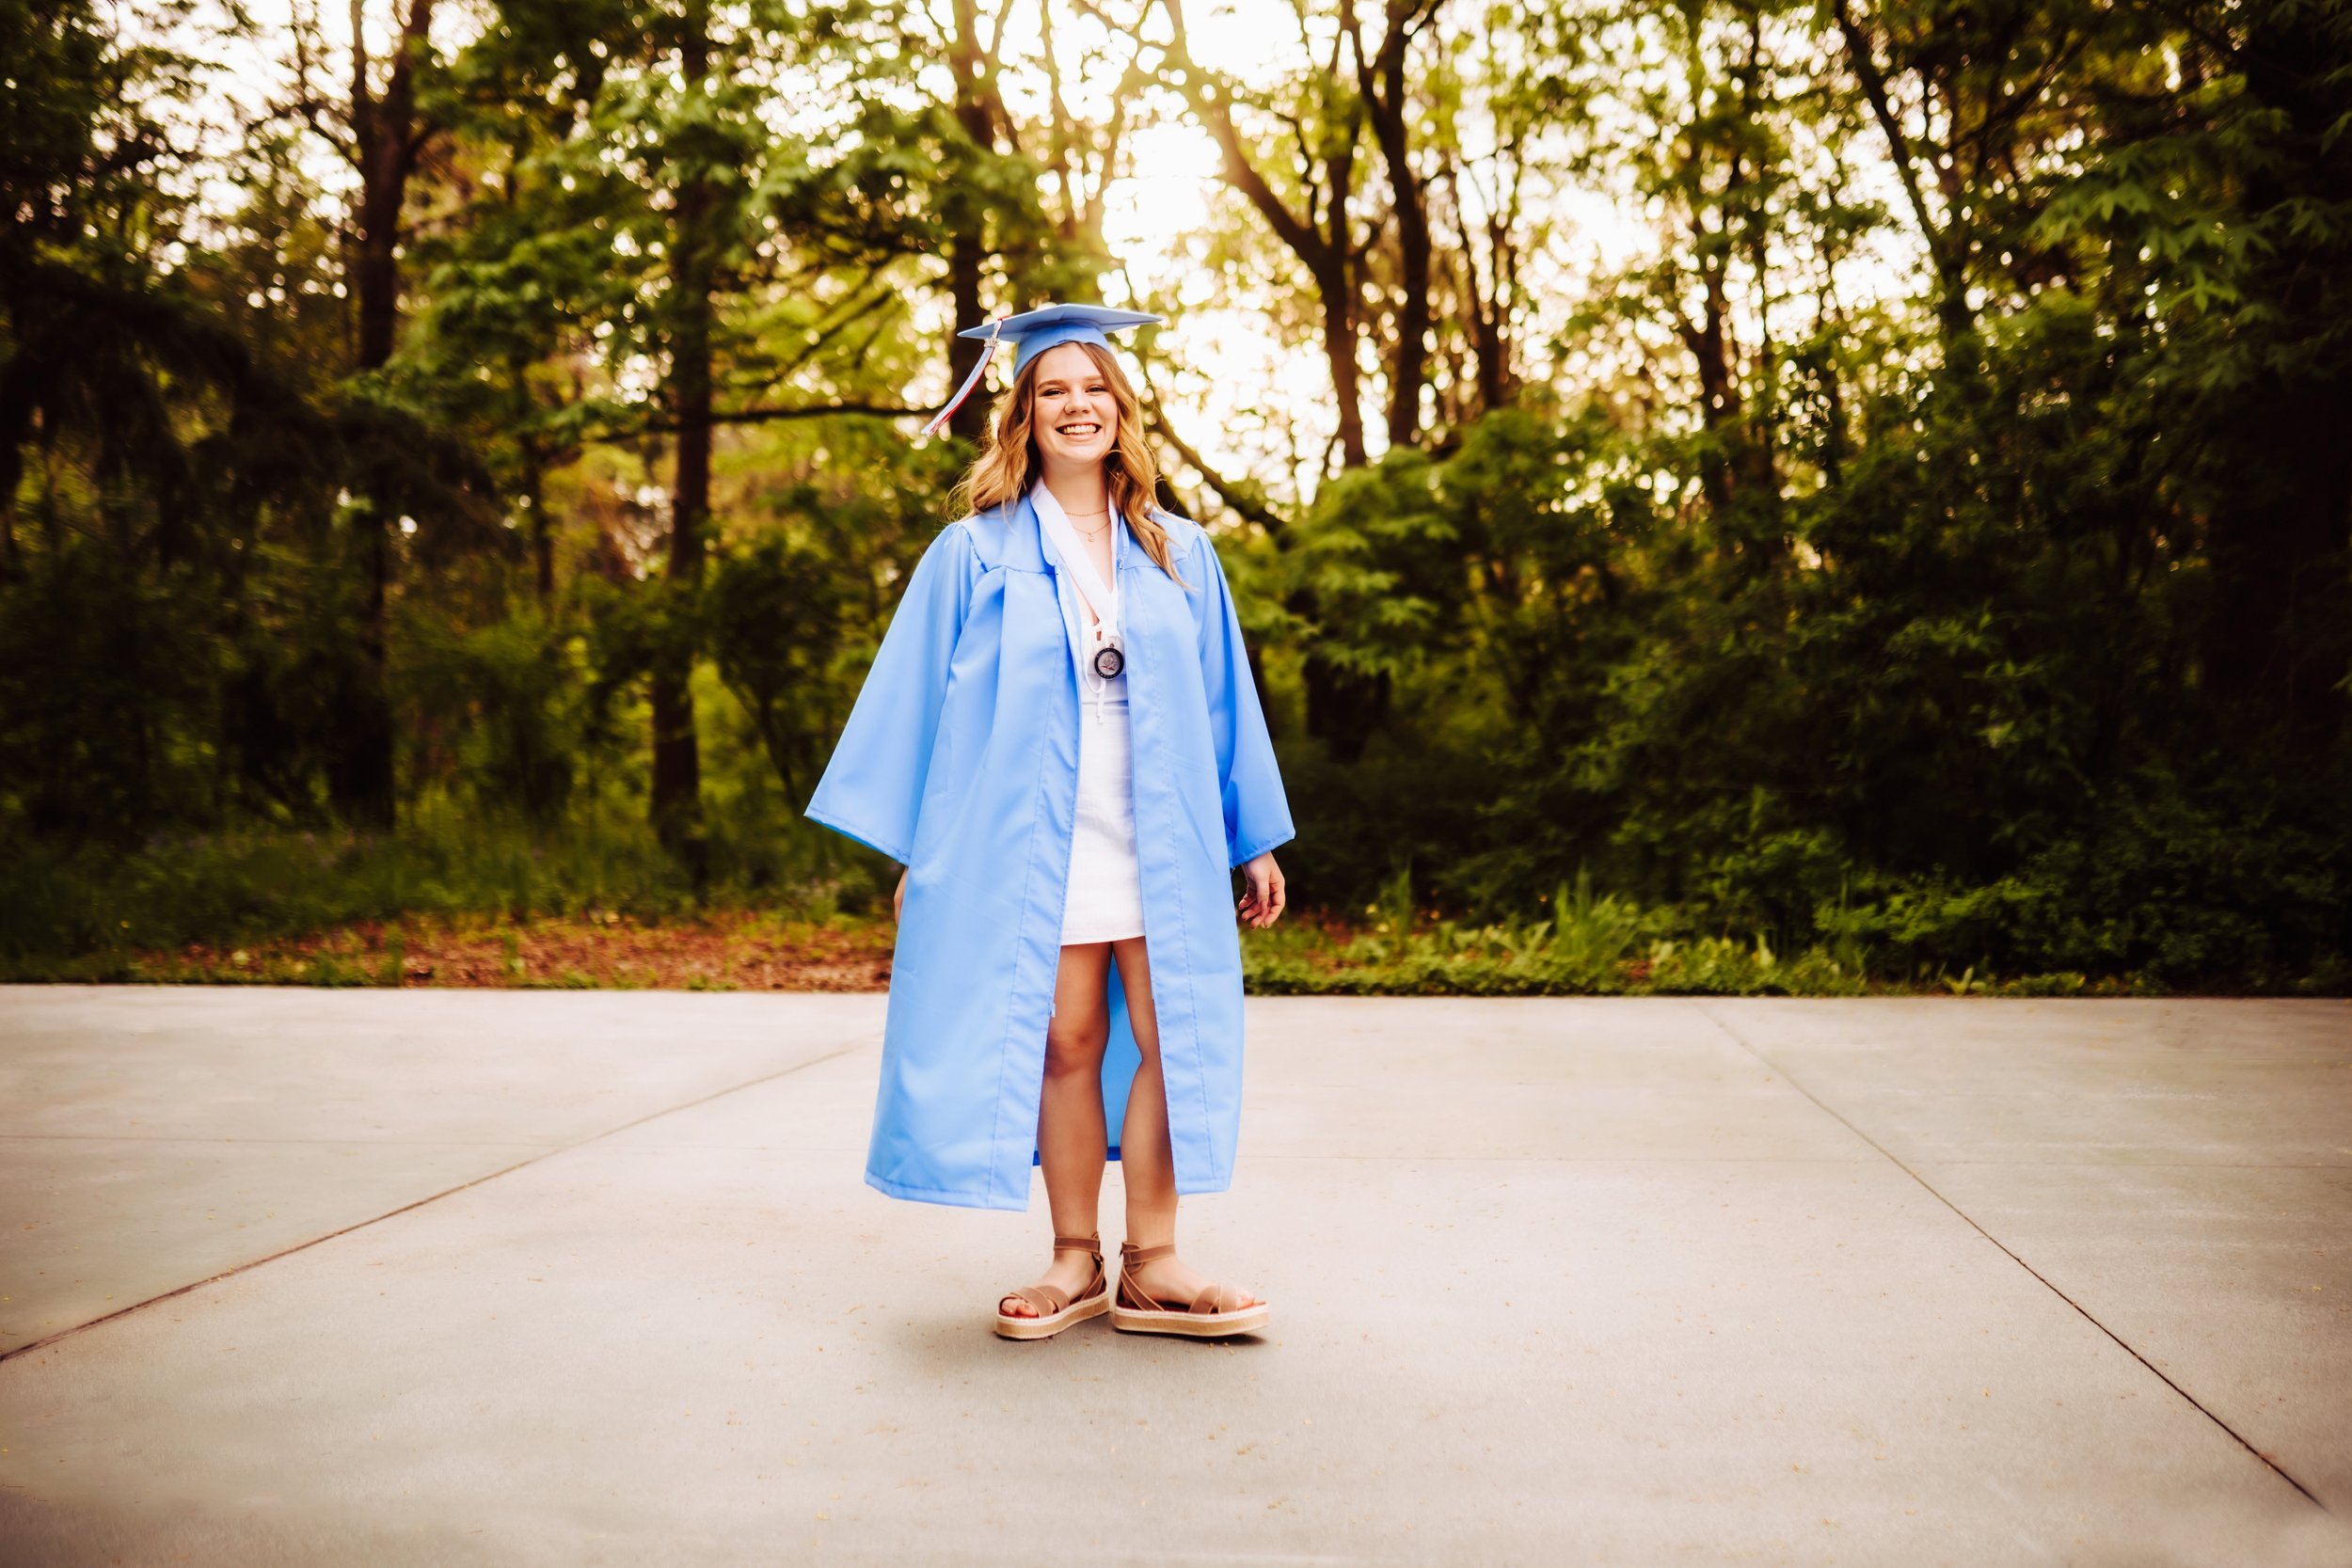 Graduating senior in blue gown standing